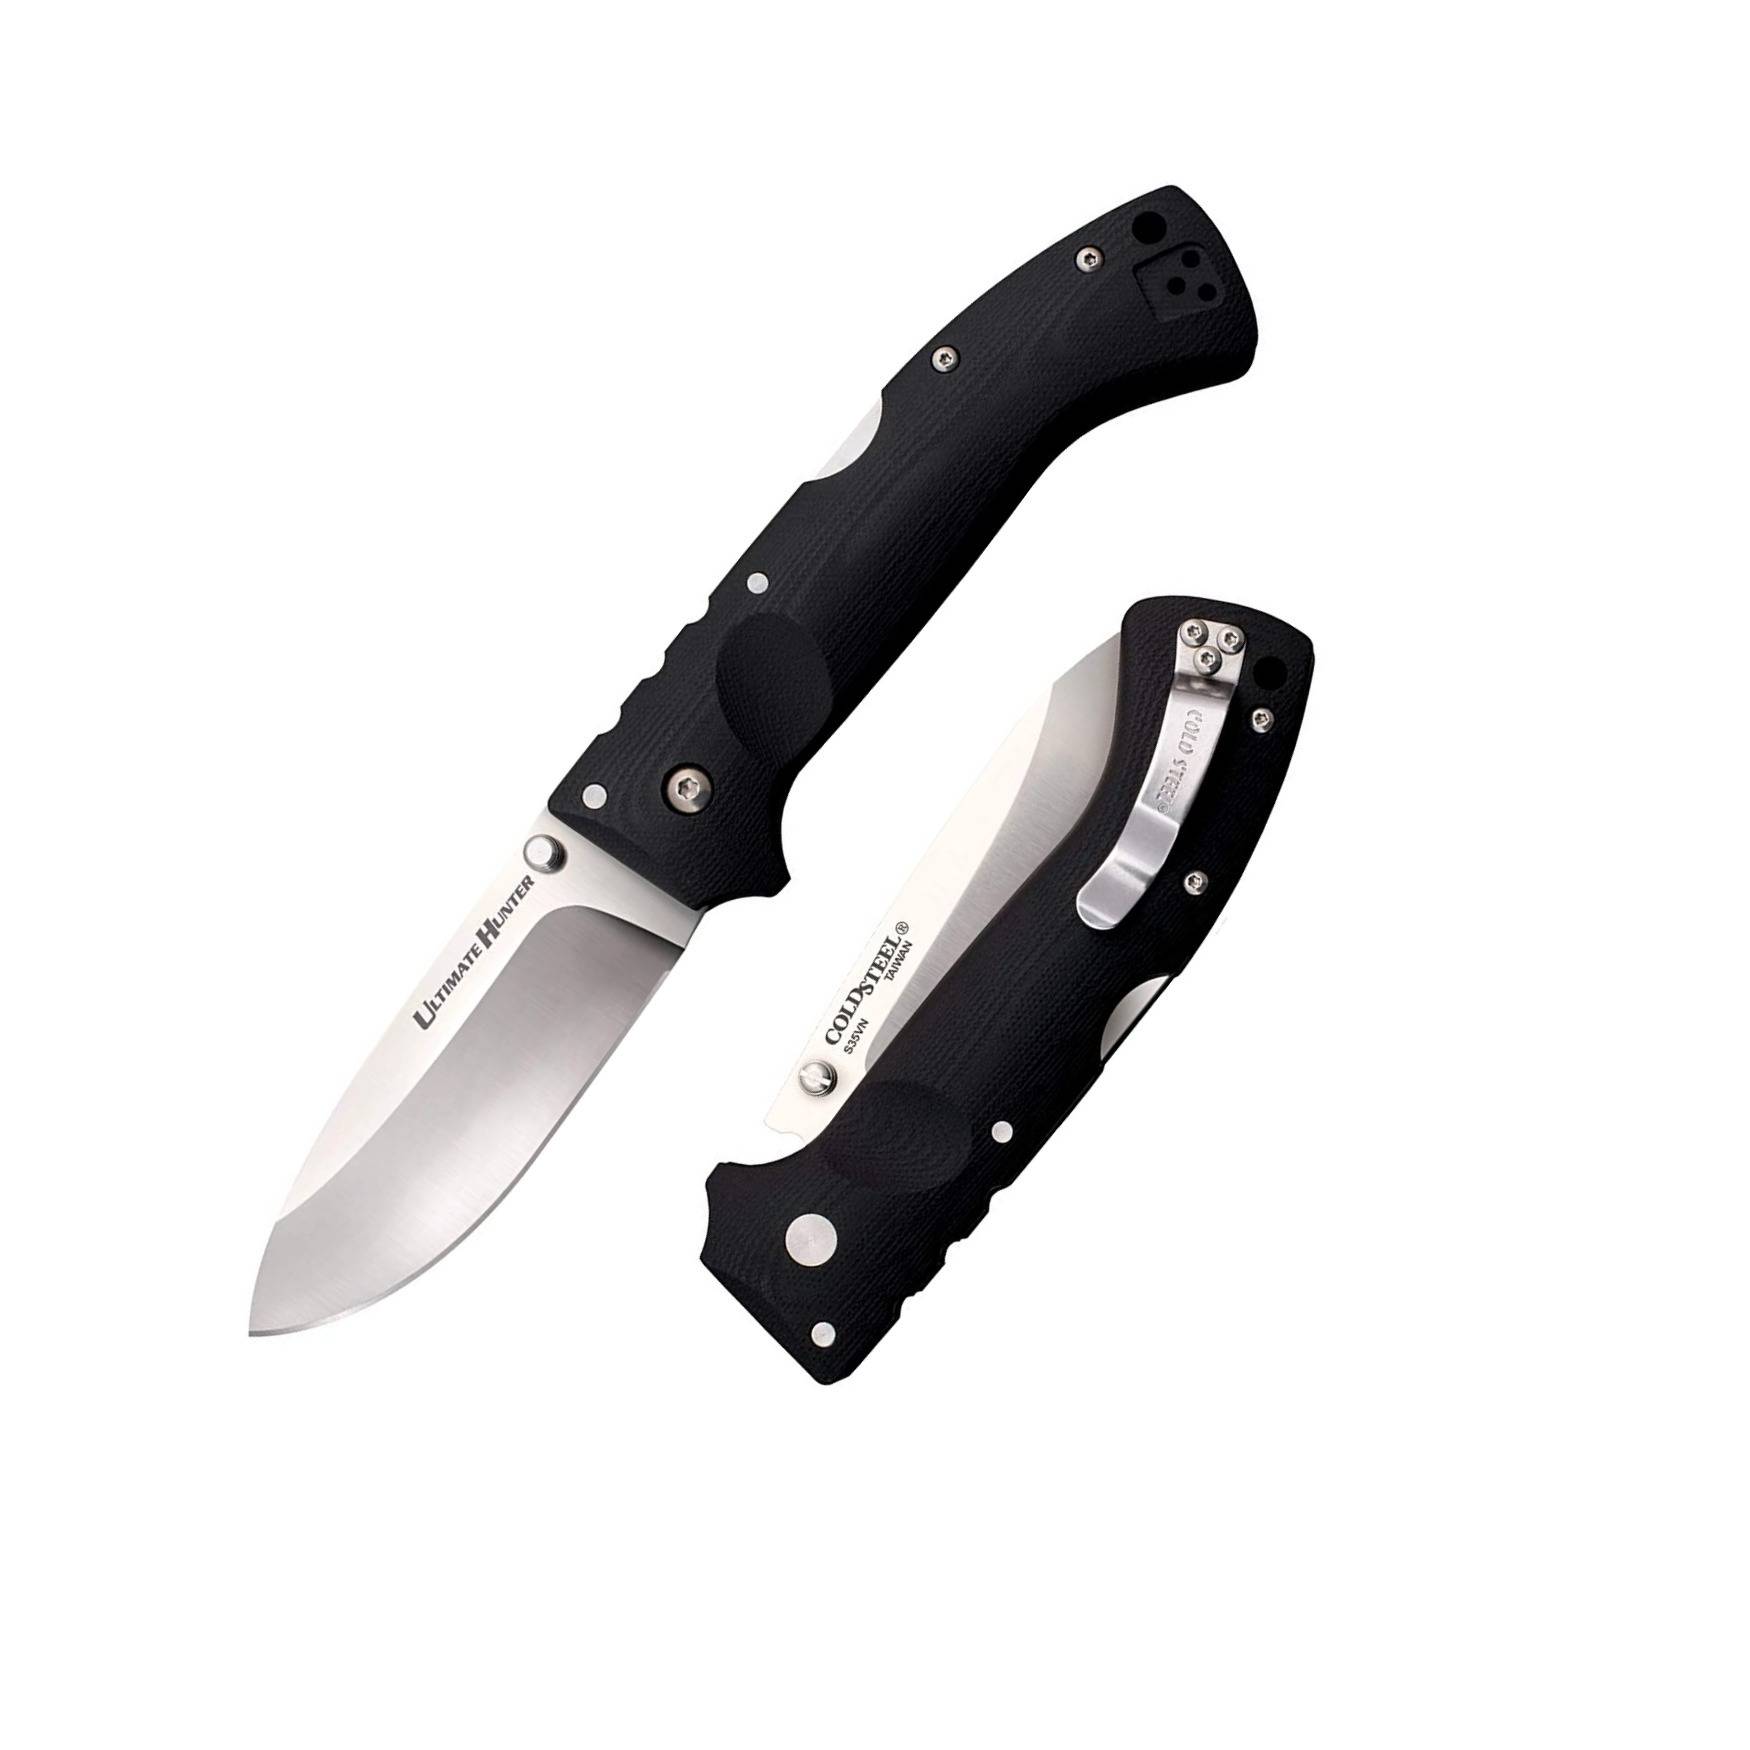 Cold Steel Ultimate Hunter 3.5-Inch Drop-Point S35VN Blade 5-Inch G10 Handle Folding Knife (Black)